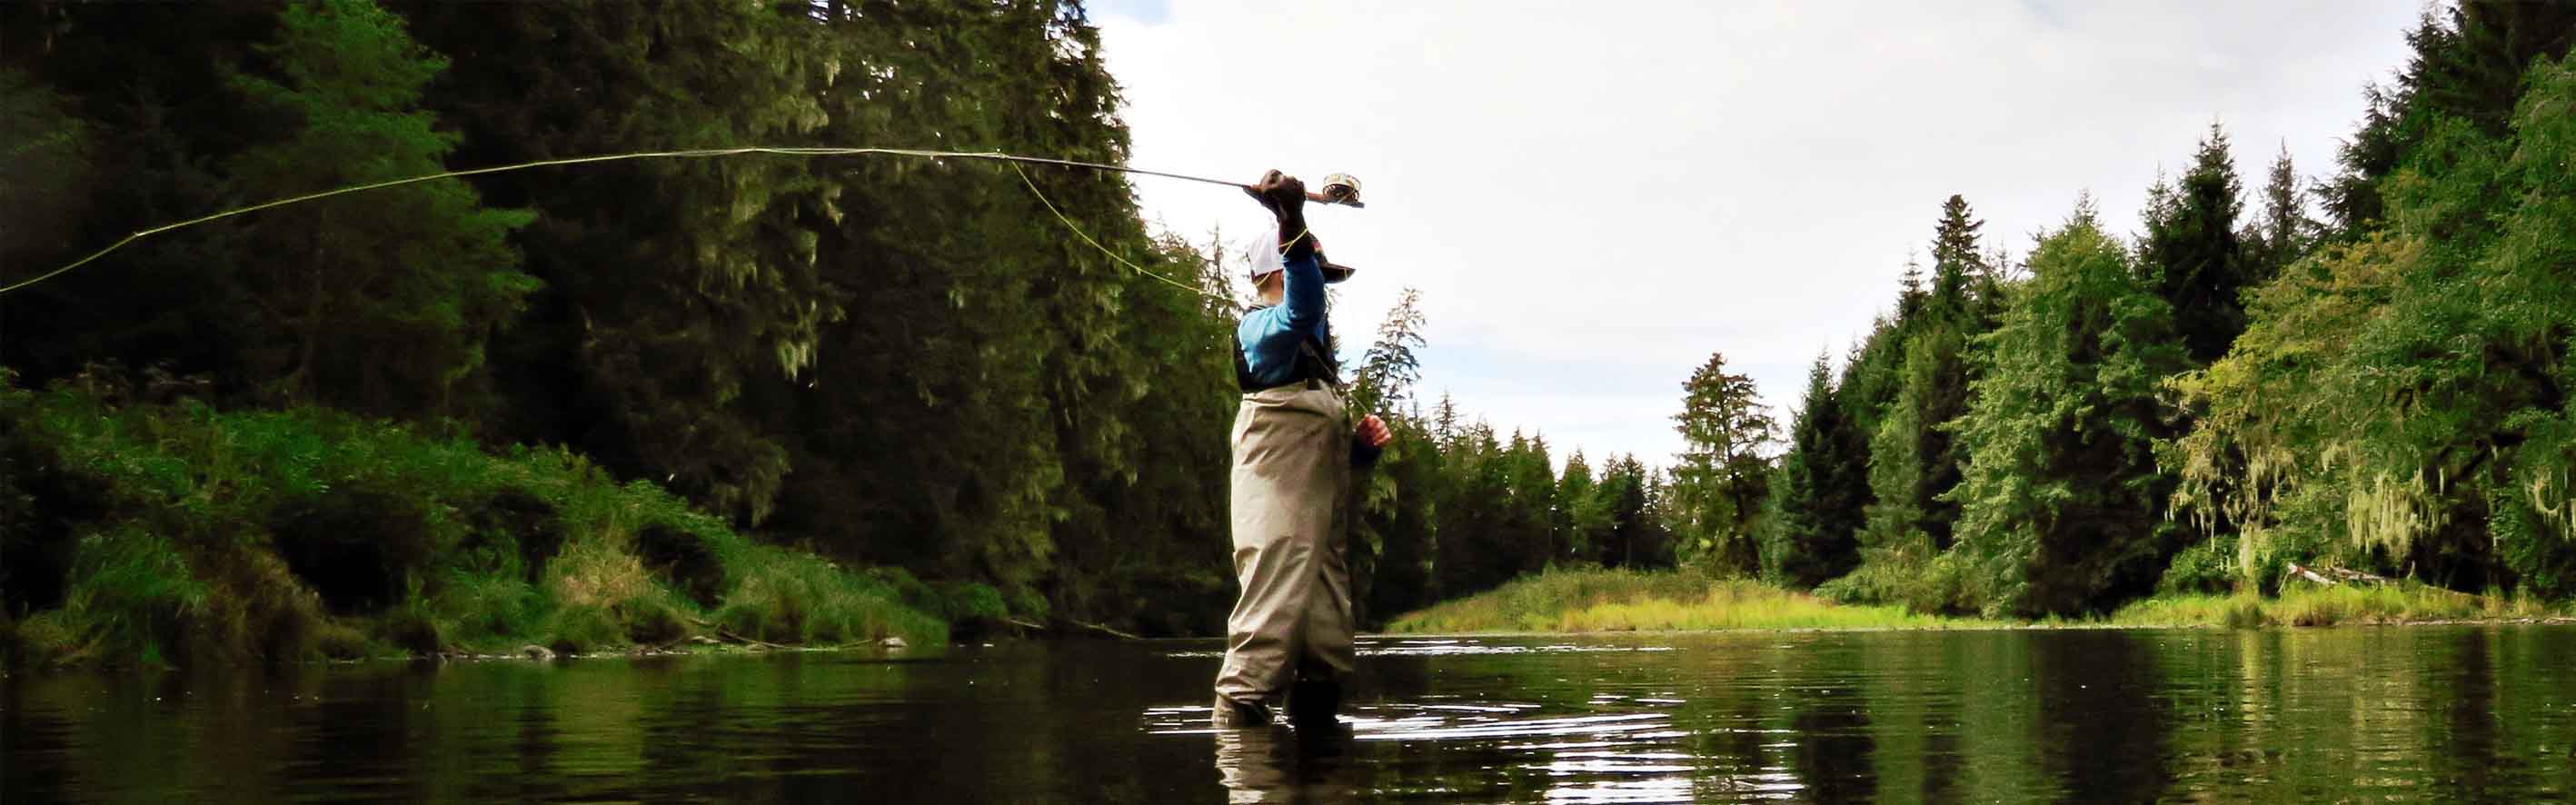 fly-fishing-banner